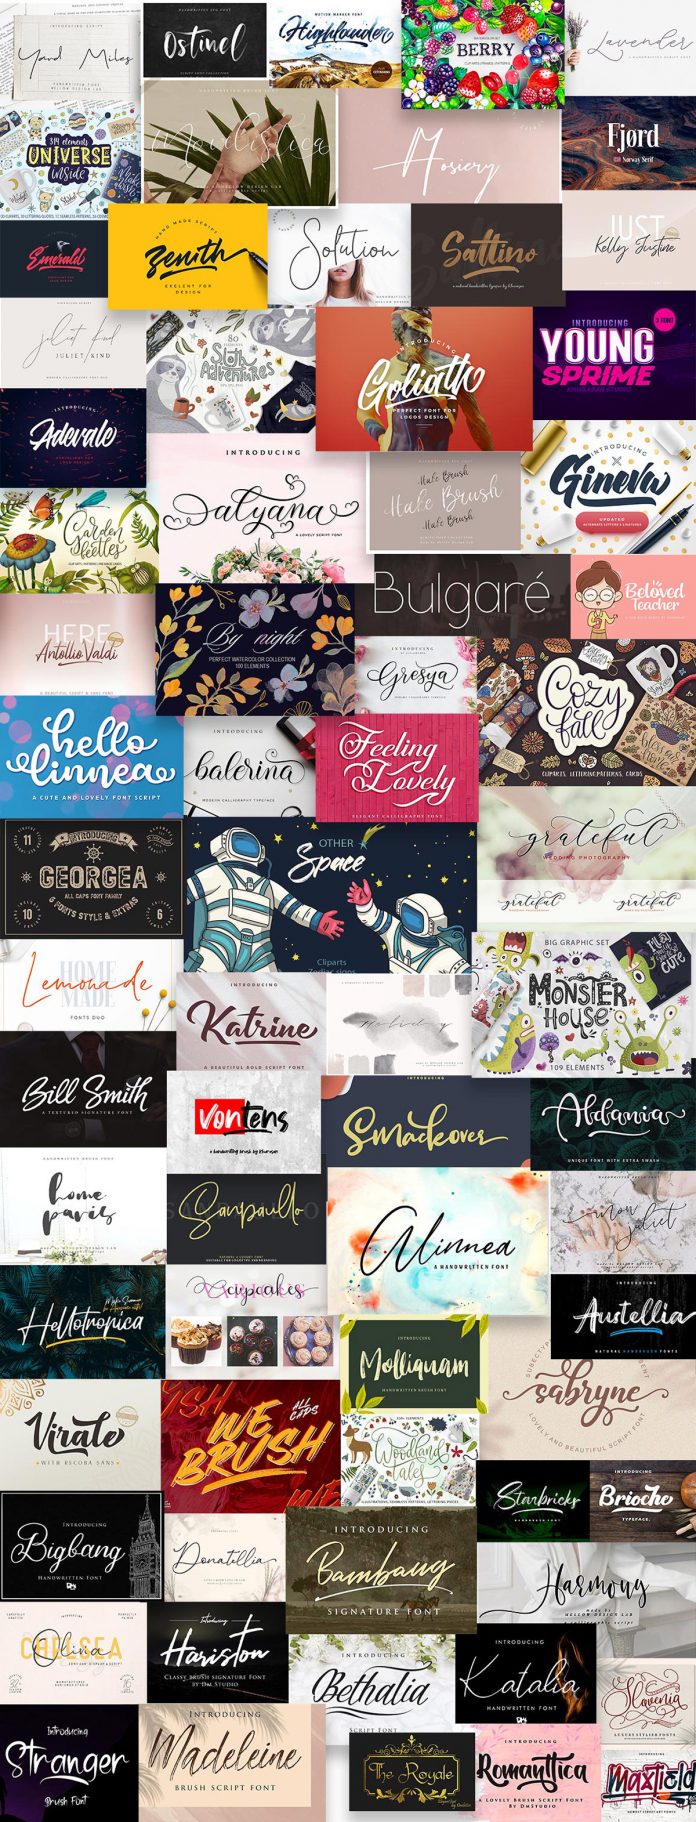 99 Fonts and 1000+ Graphics